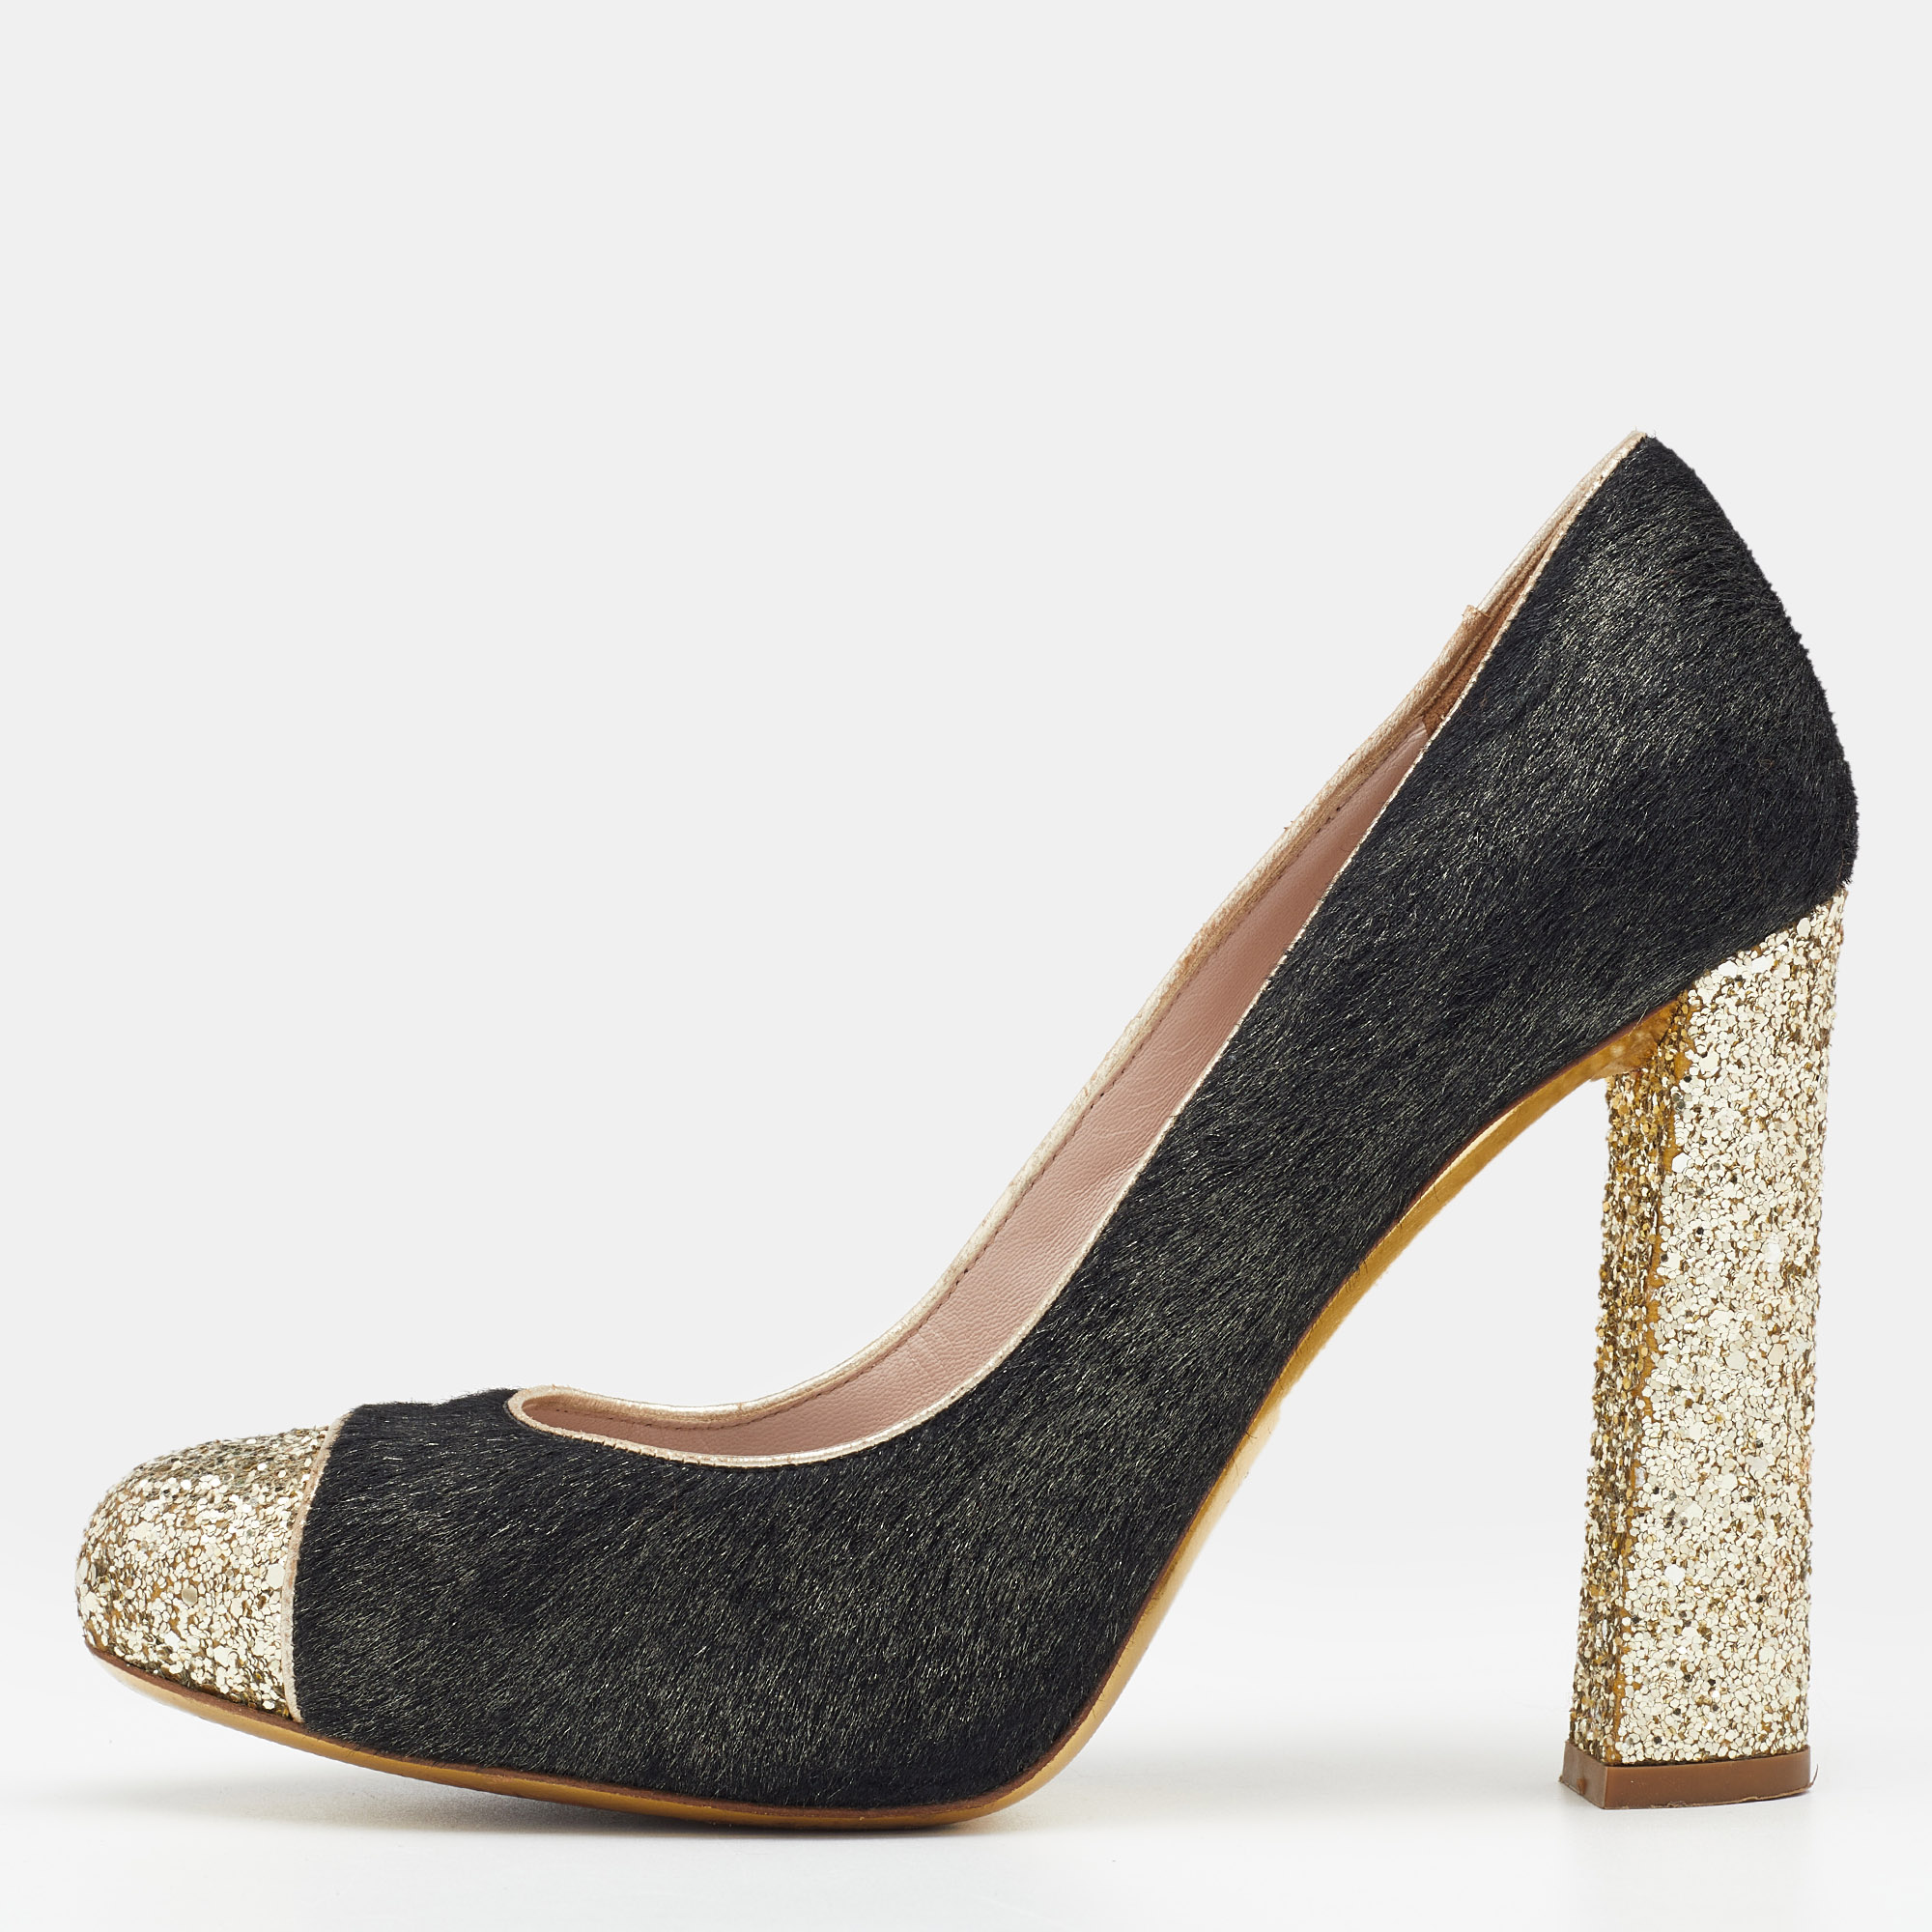 Grab these gorgeous pumps from the House of Miu Miu and walk confidently with elegant grace Fashioned in black gold calf hair and glitter these pumps are enhanced with cap toes block heels and a slip on feature. These pumps will pair well with your party outfits.